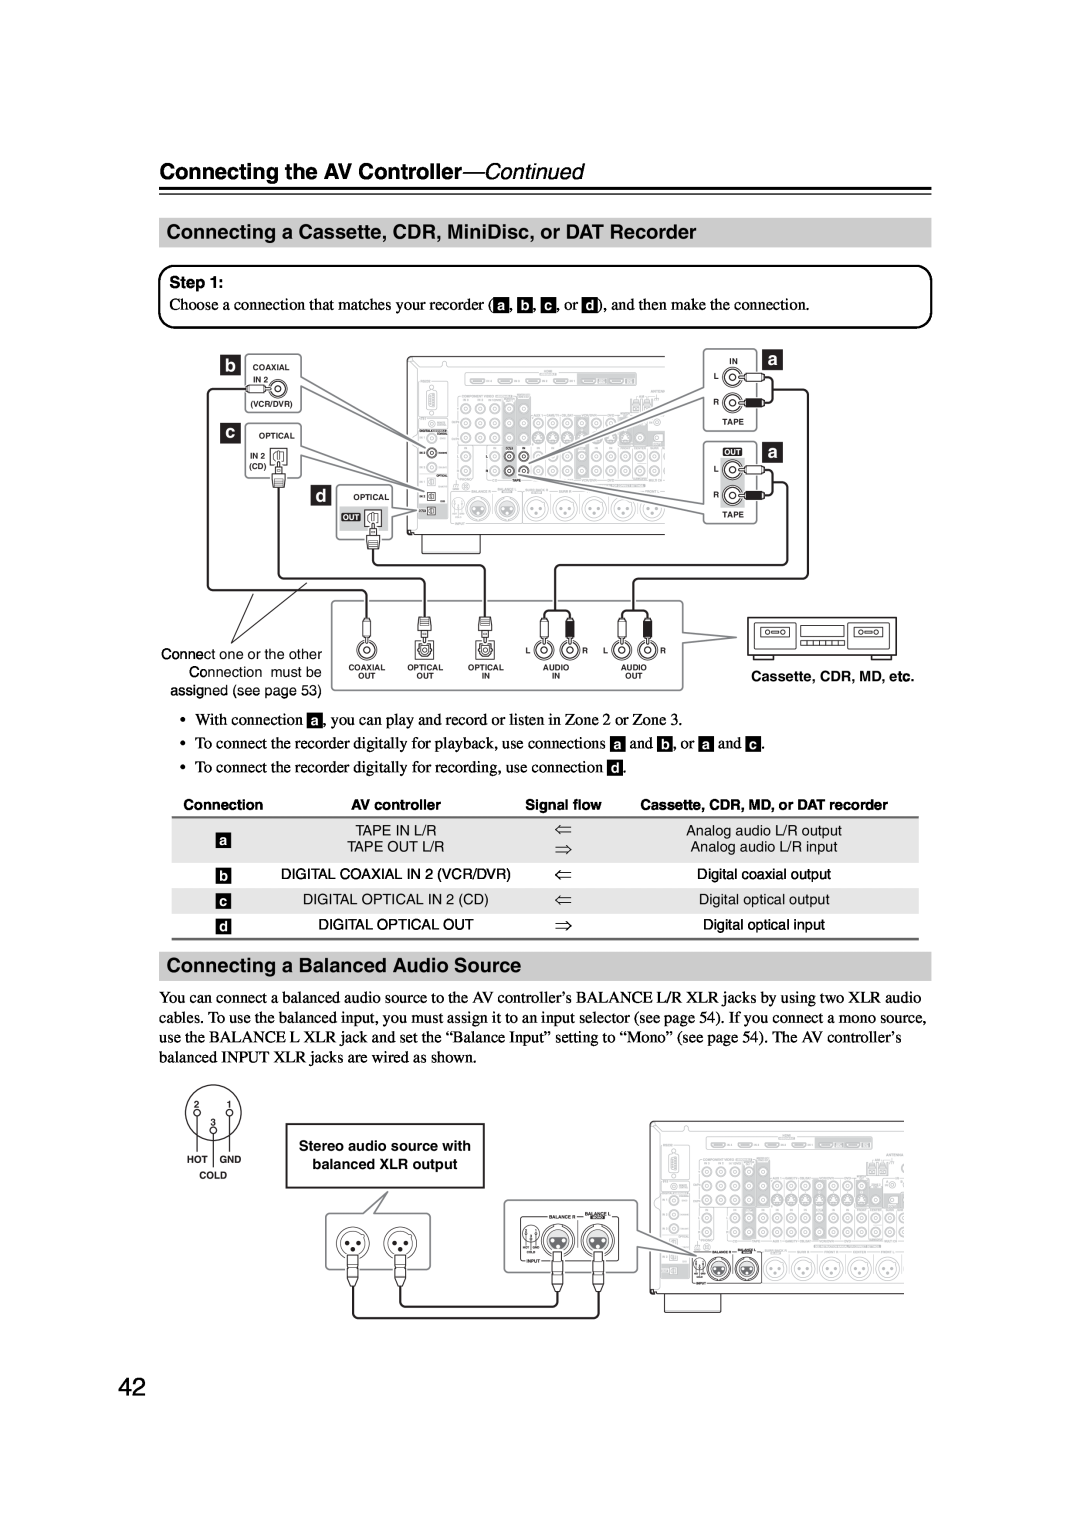 Integra DHC-9.9 instruction manual Connecting a Balanced Audio Source, Connecting the AV Controller—Continued 